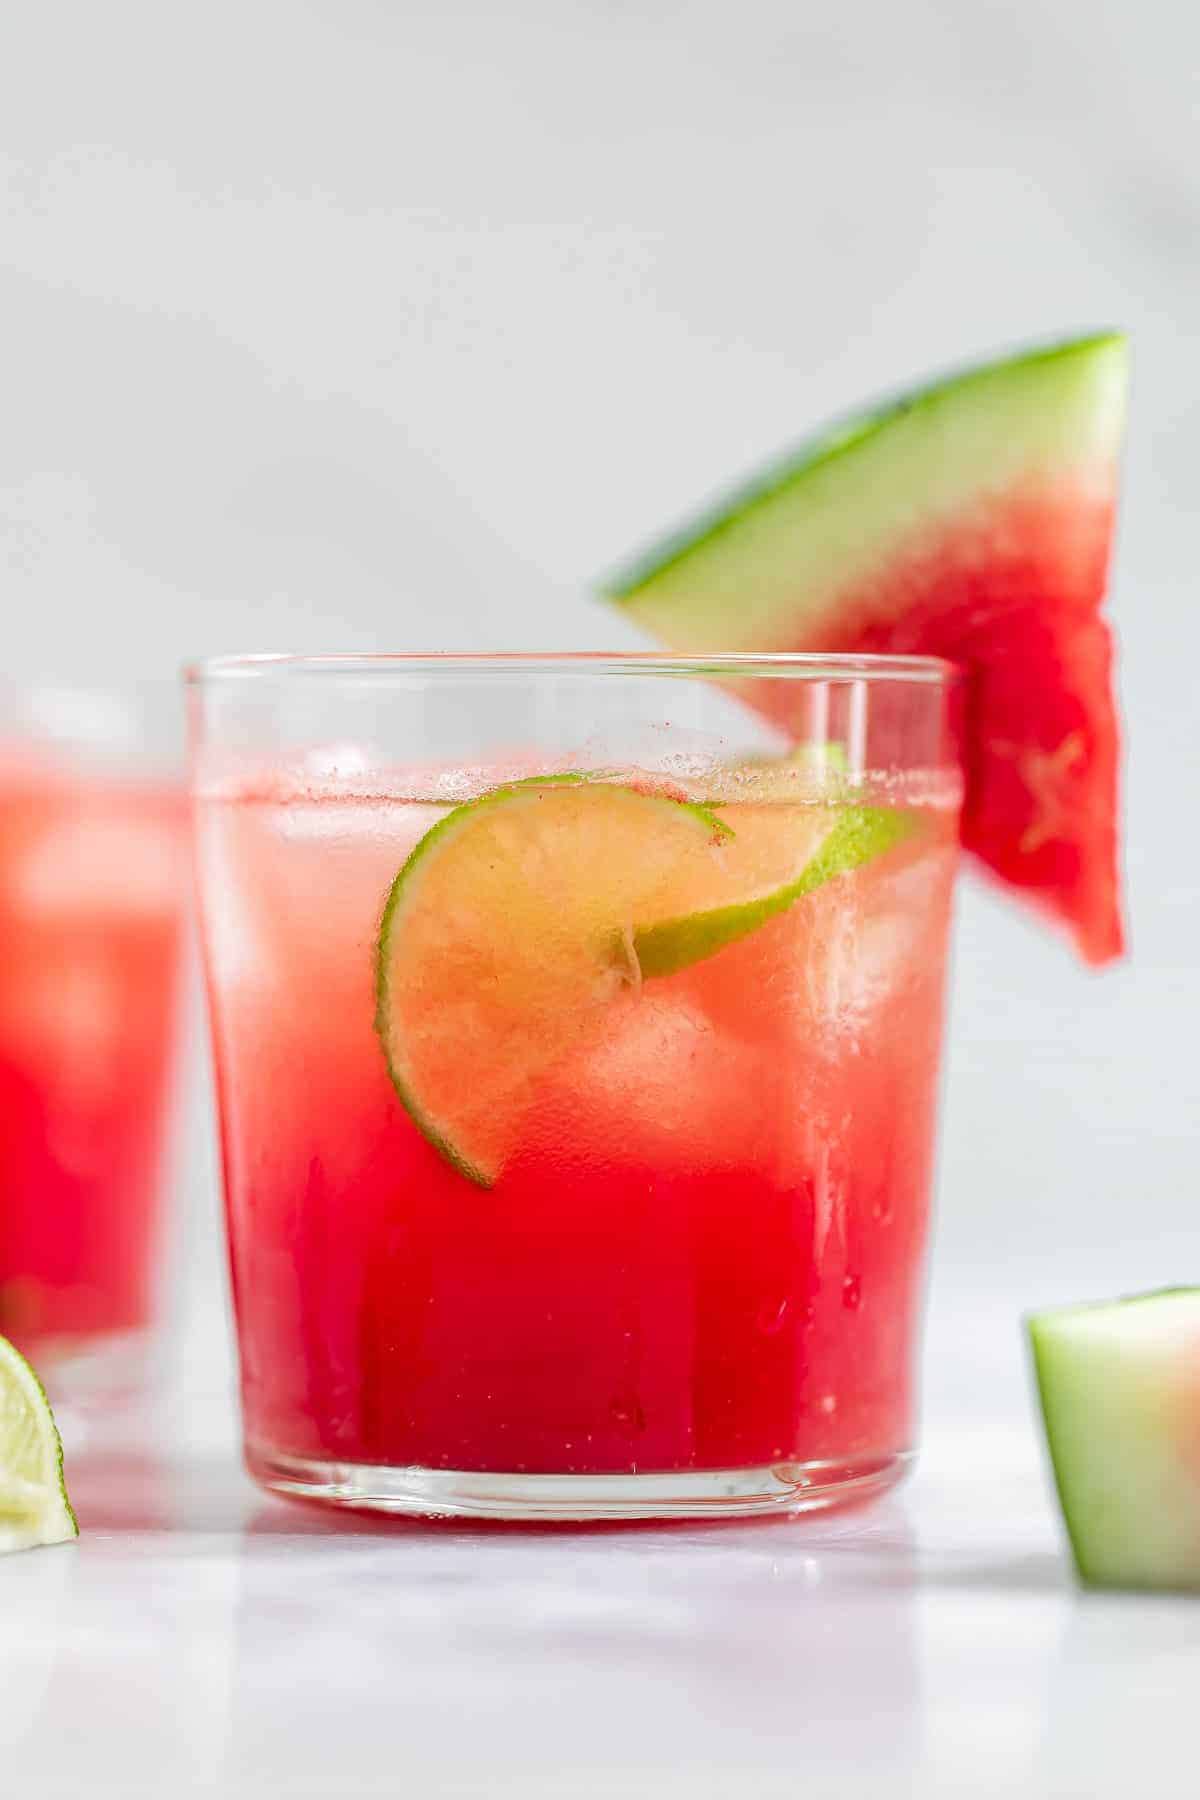 Up close image of the vodka cocktail with lime and watermelon wedges.